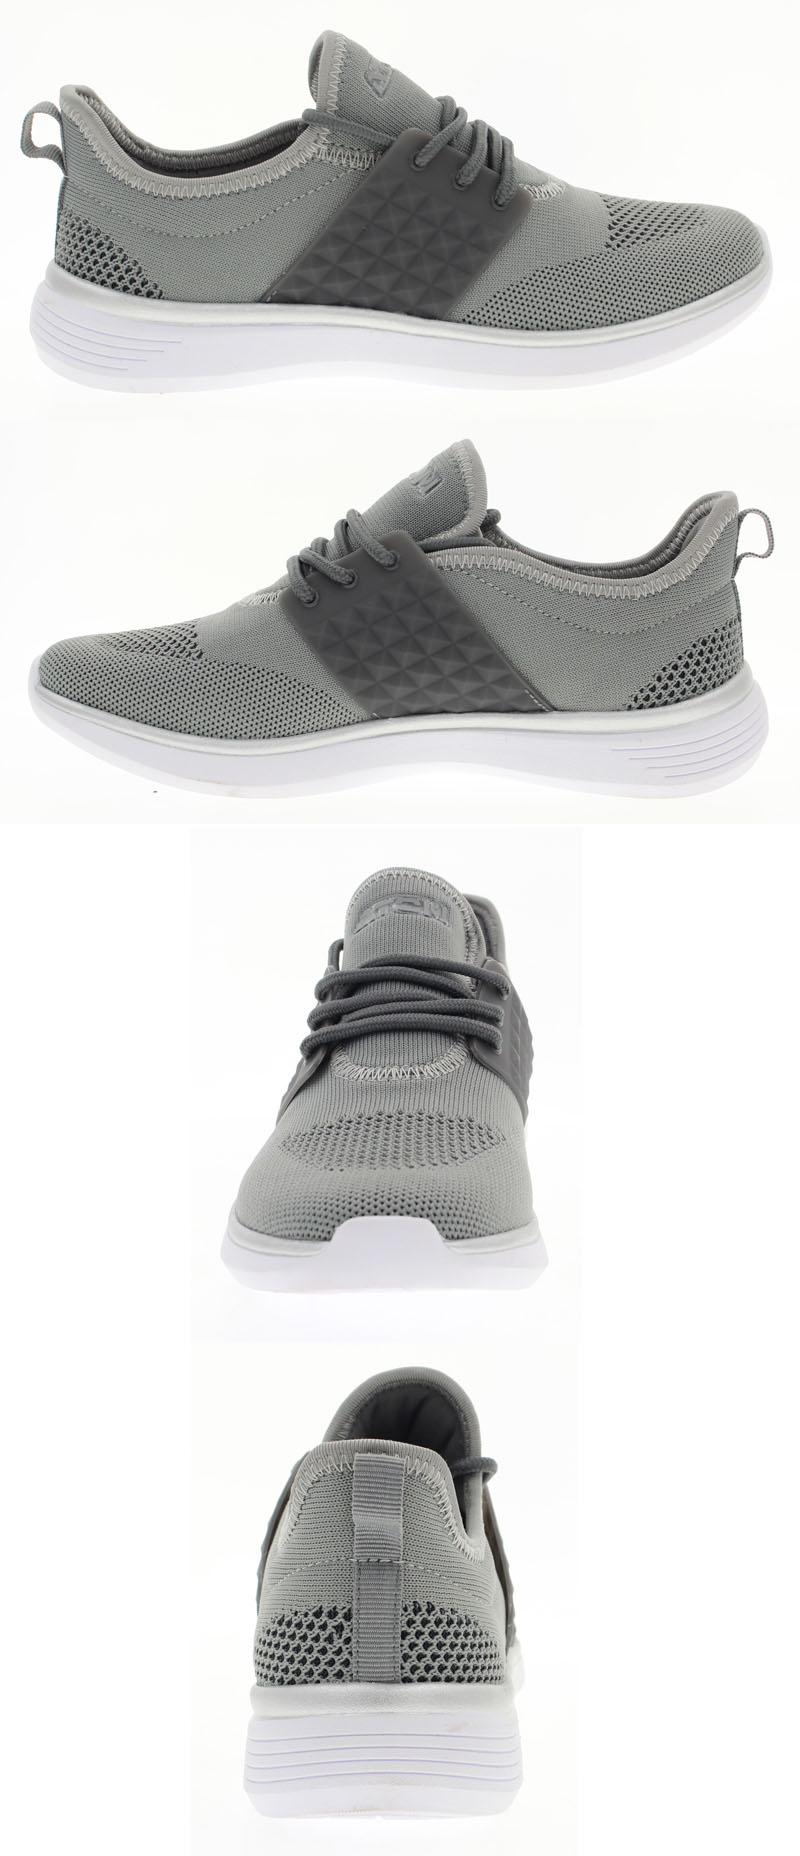 The grey system running shoes